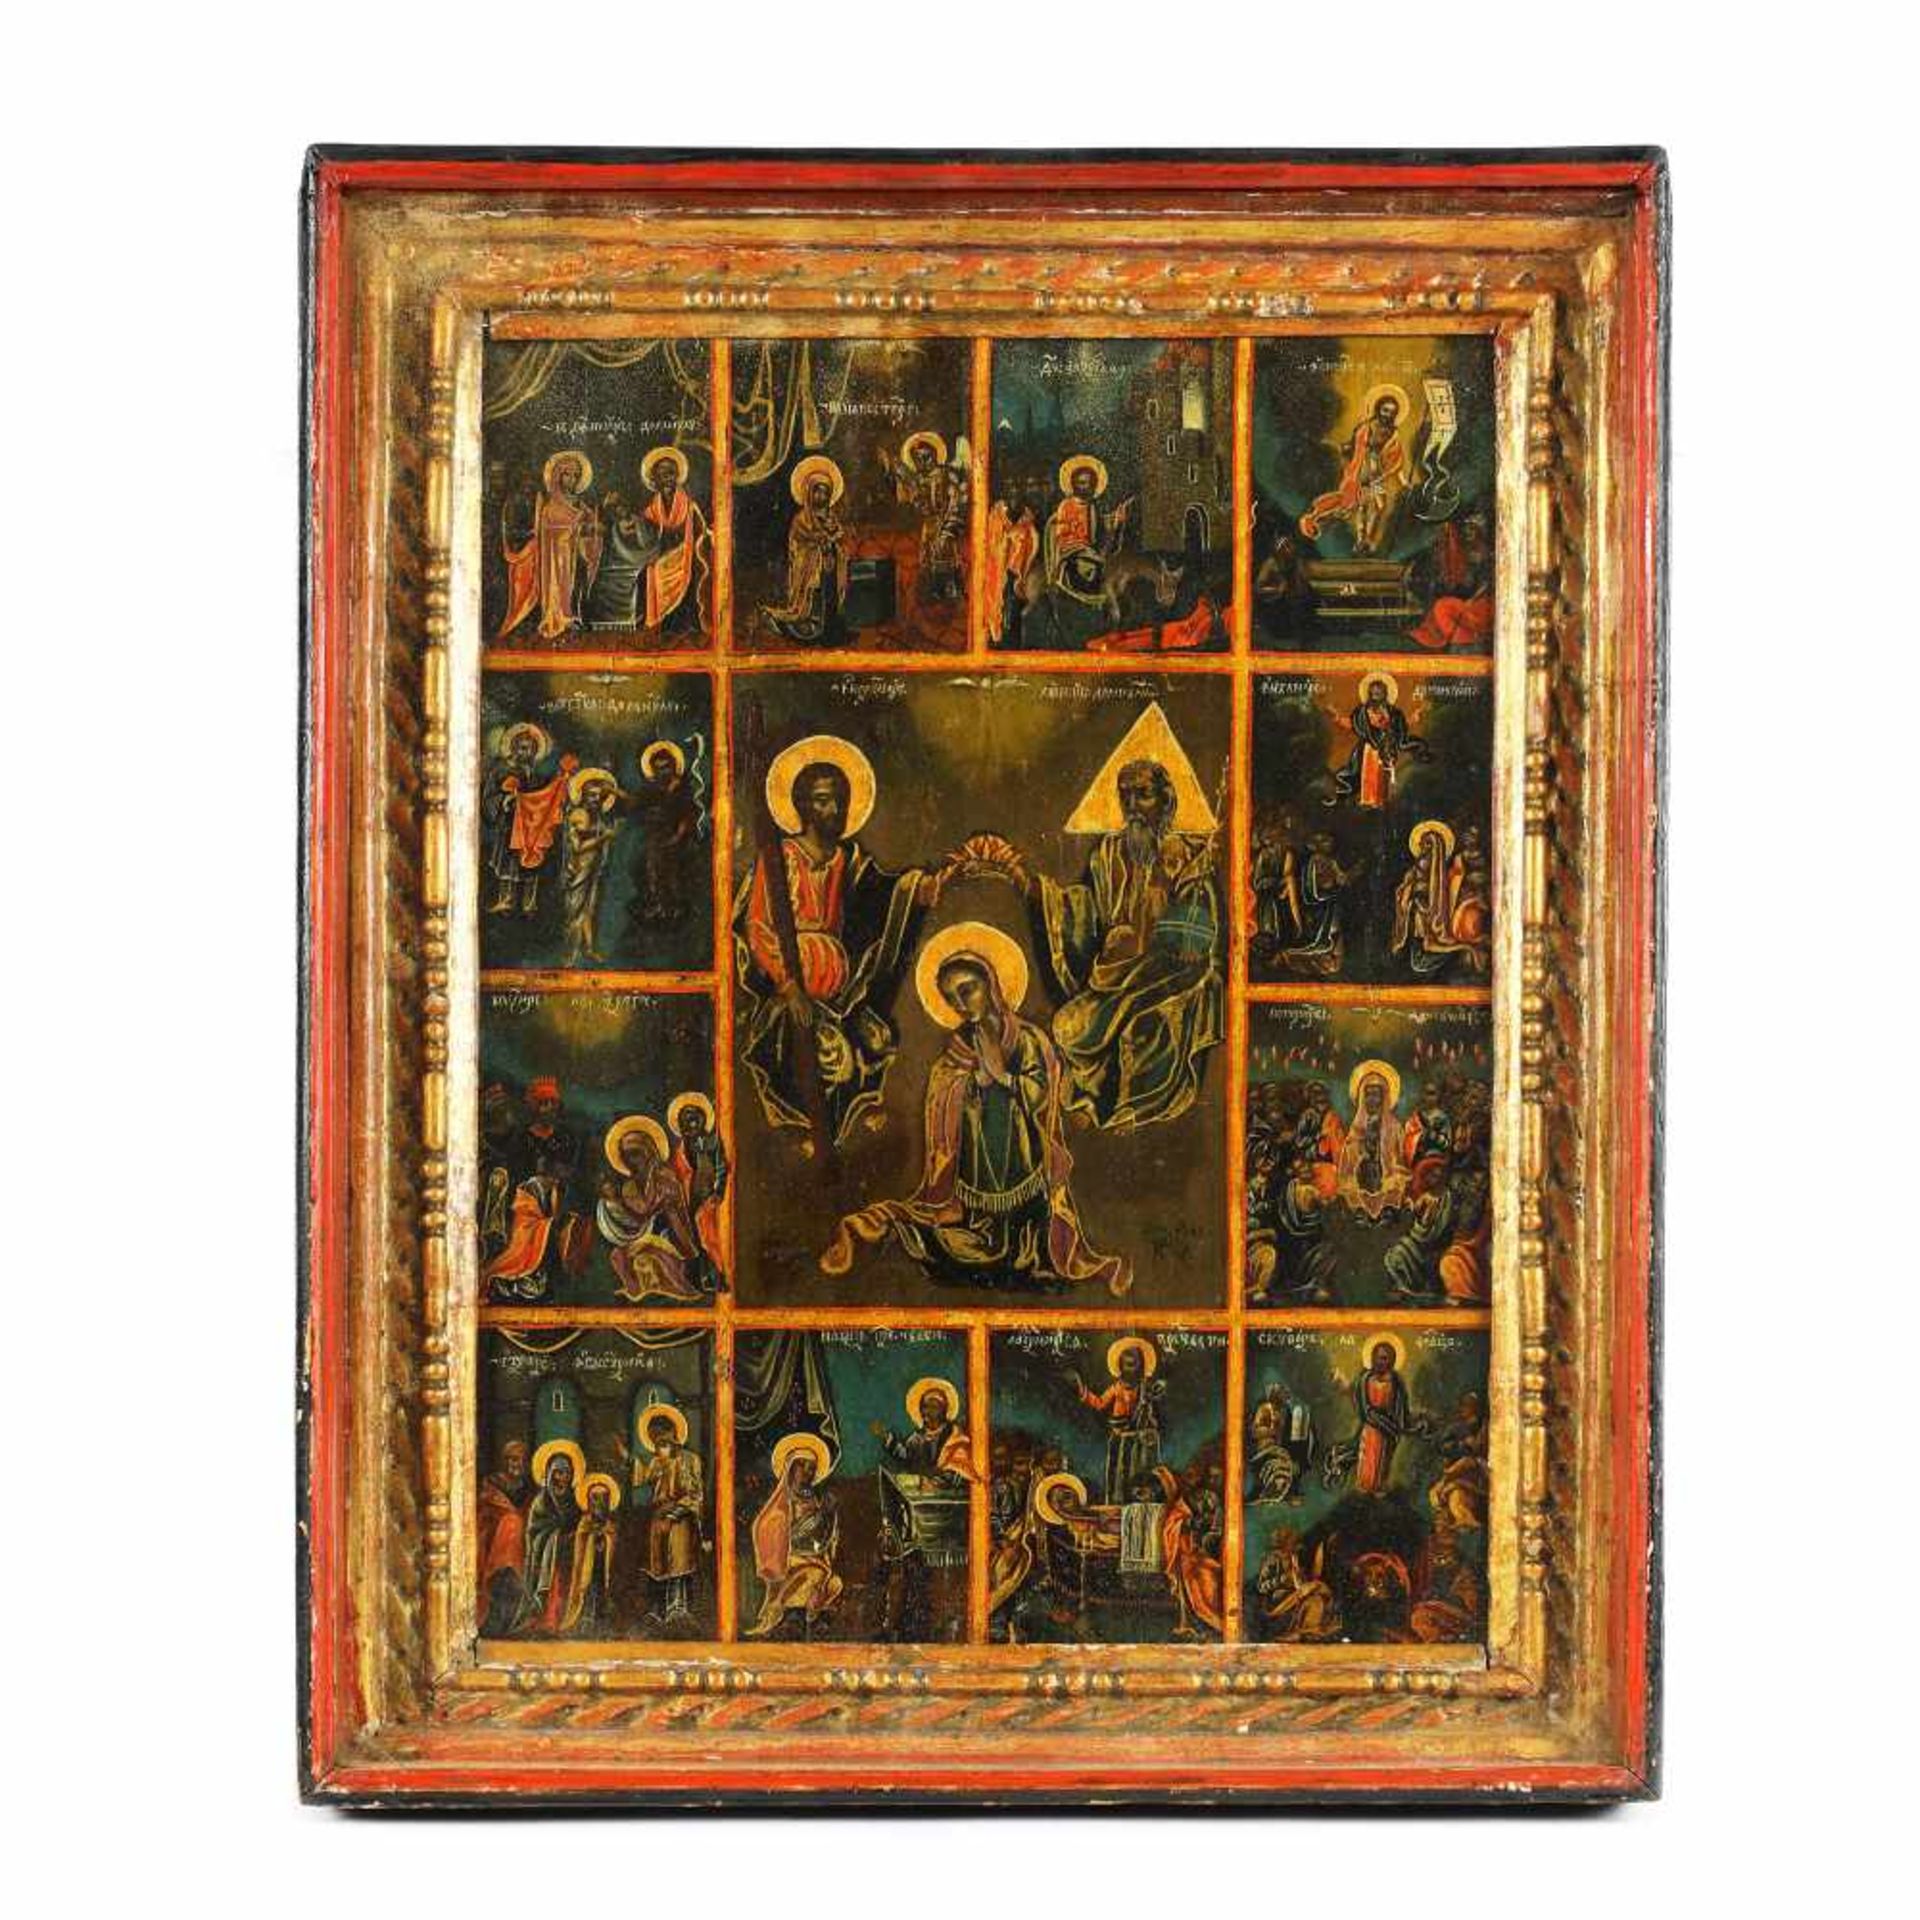 "Coronation of the Mother of God (Holy Trinity) and 12 scenes", holiday icon on wood, carved and pai